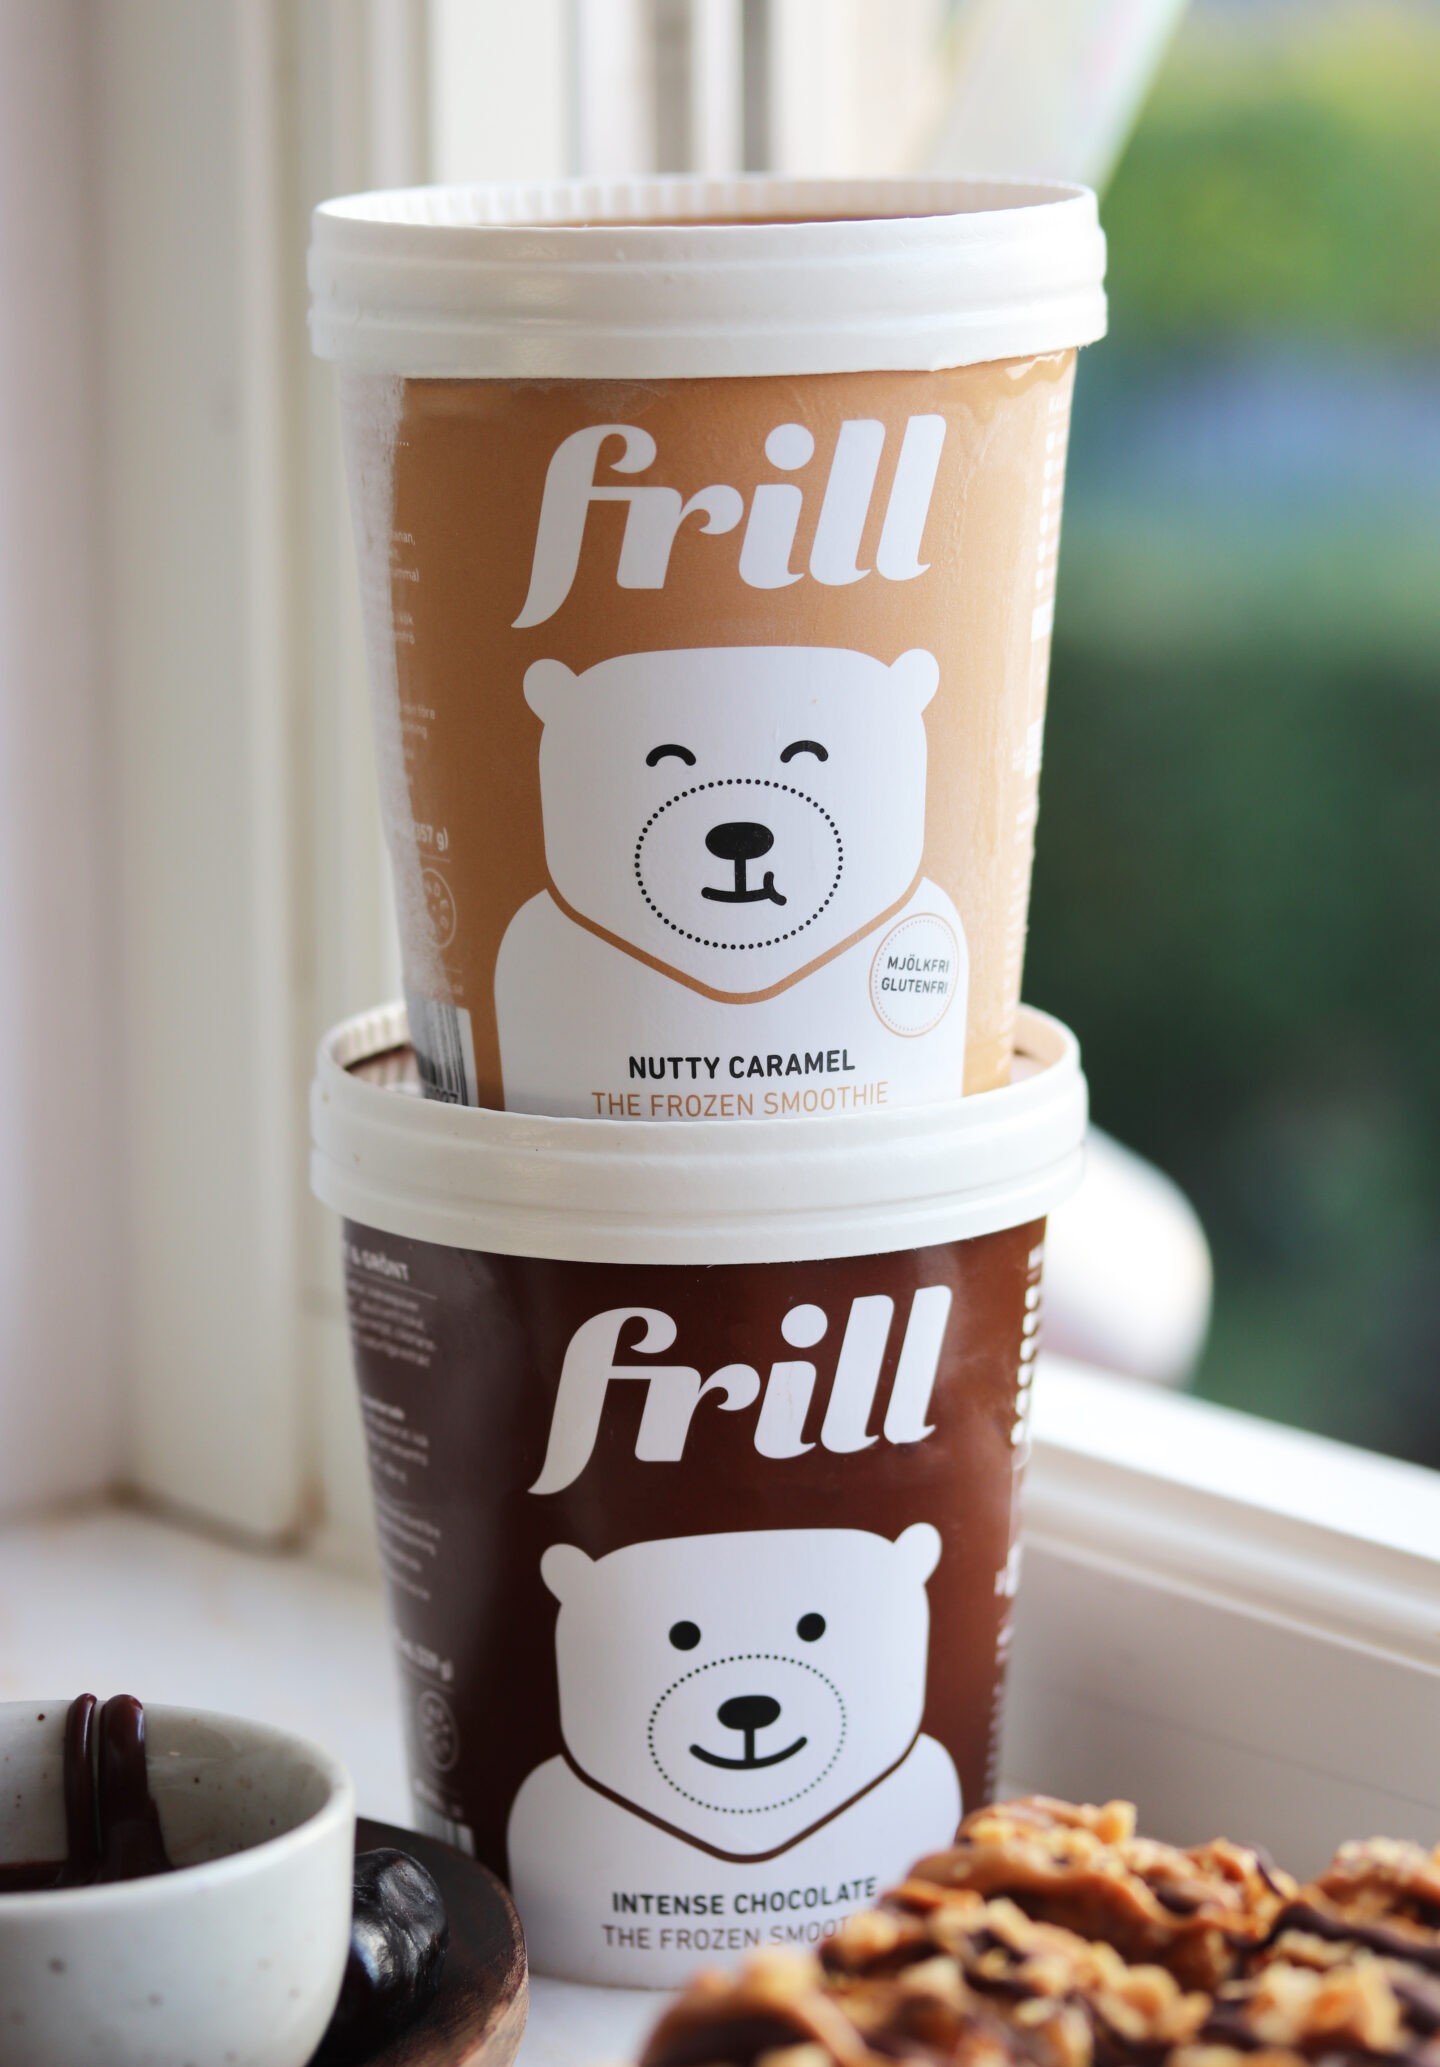 Frill ice cream review (All four flavours)